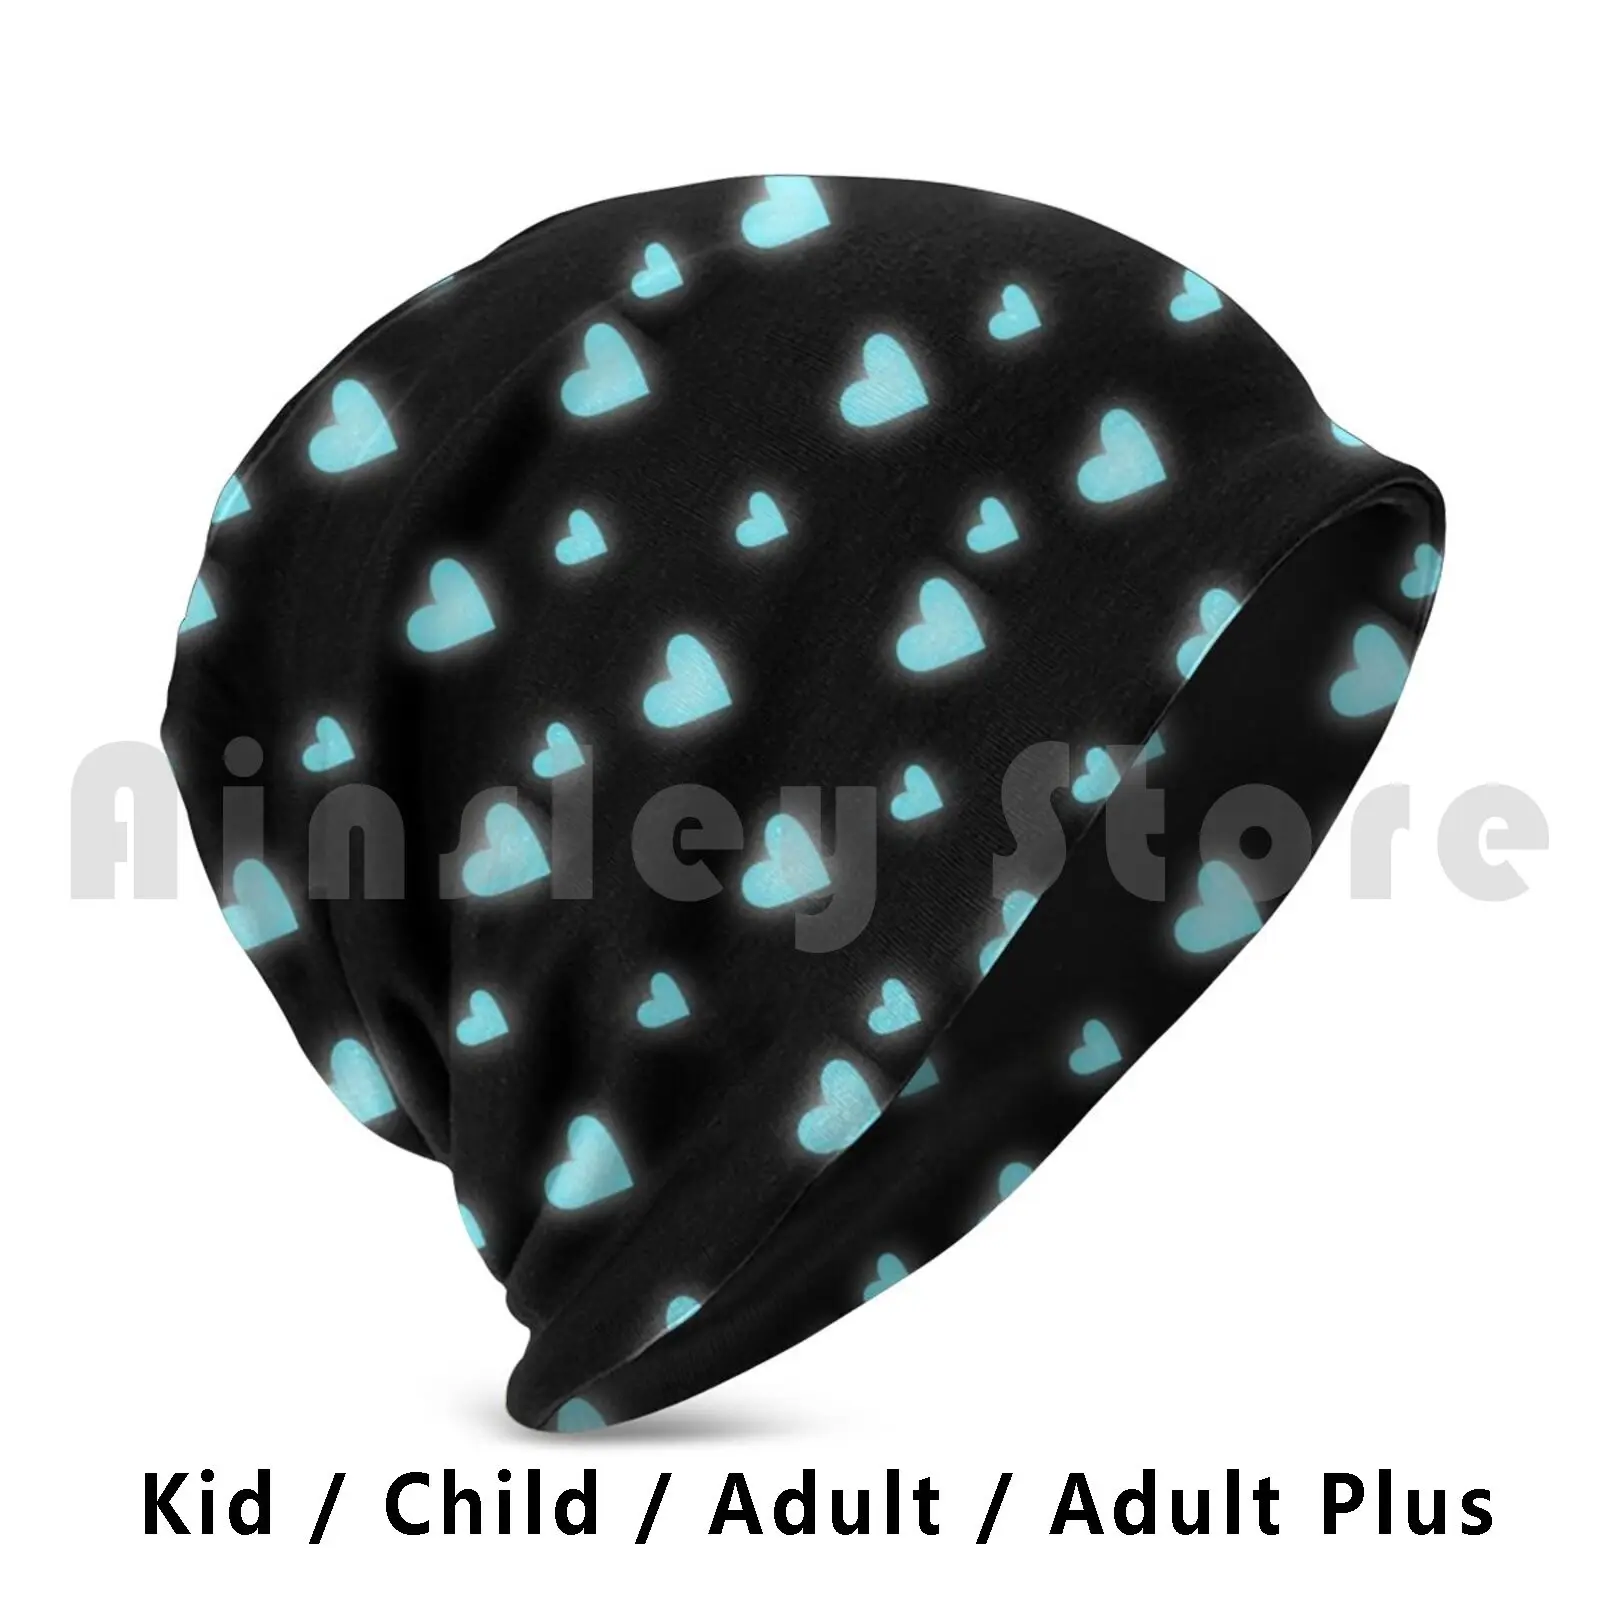 

Blue Glowing Hearts Beanies Knit Hat Hip Hop Glow In The Dark Hearts Blue Glowing Hearts Pattern Simple Bright